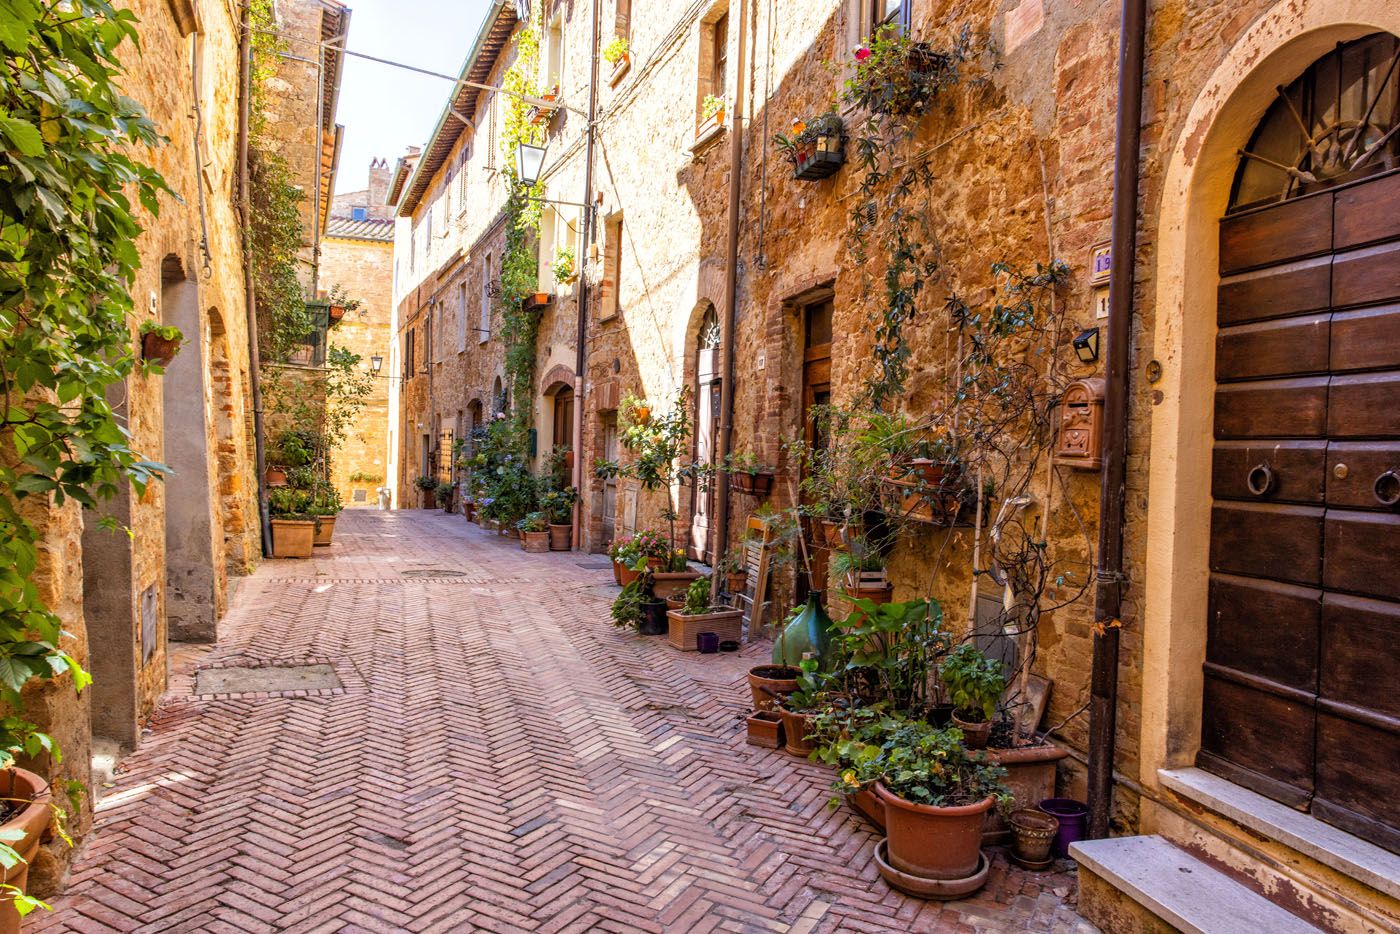 Pienza Photo | Best Things to Do in Tuscany